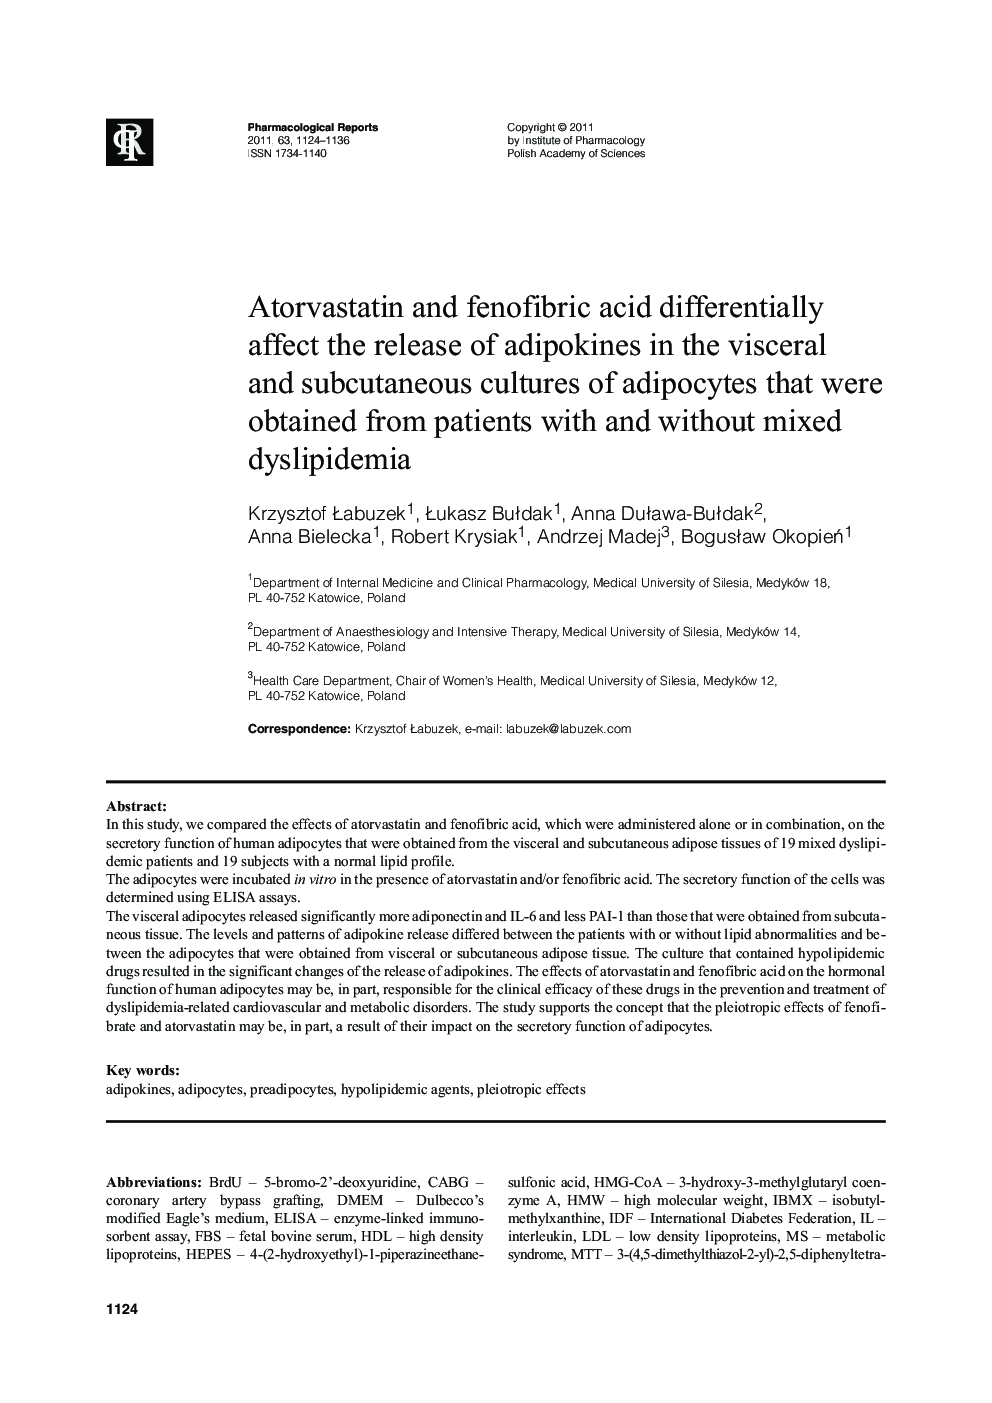 Atorvastatin and fenofibric acid differentially affect the release of adipokines in the visceral and subcutaneous cultures of adipocytes that were obtained from patients with and without mixed dyslipidemia